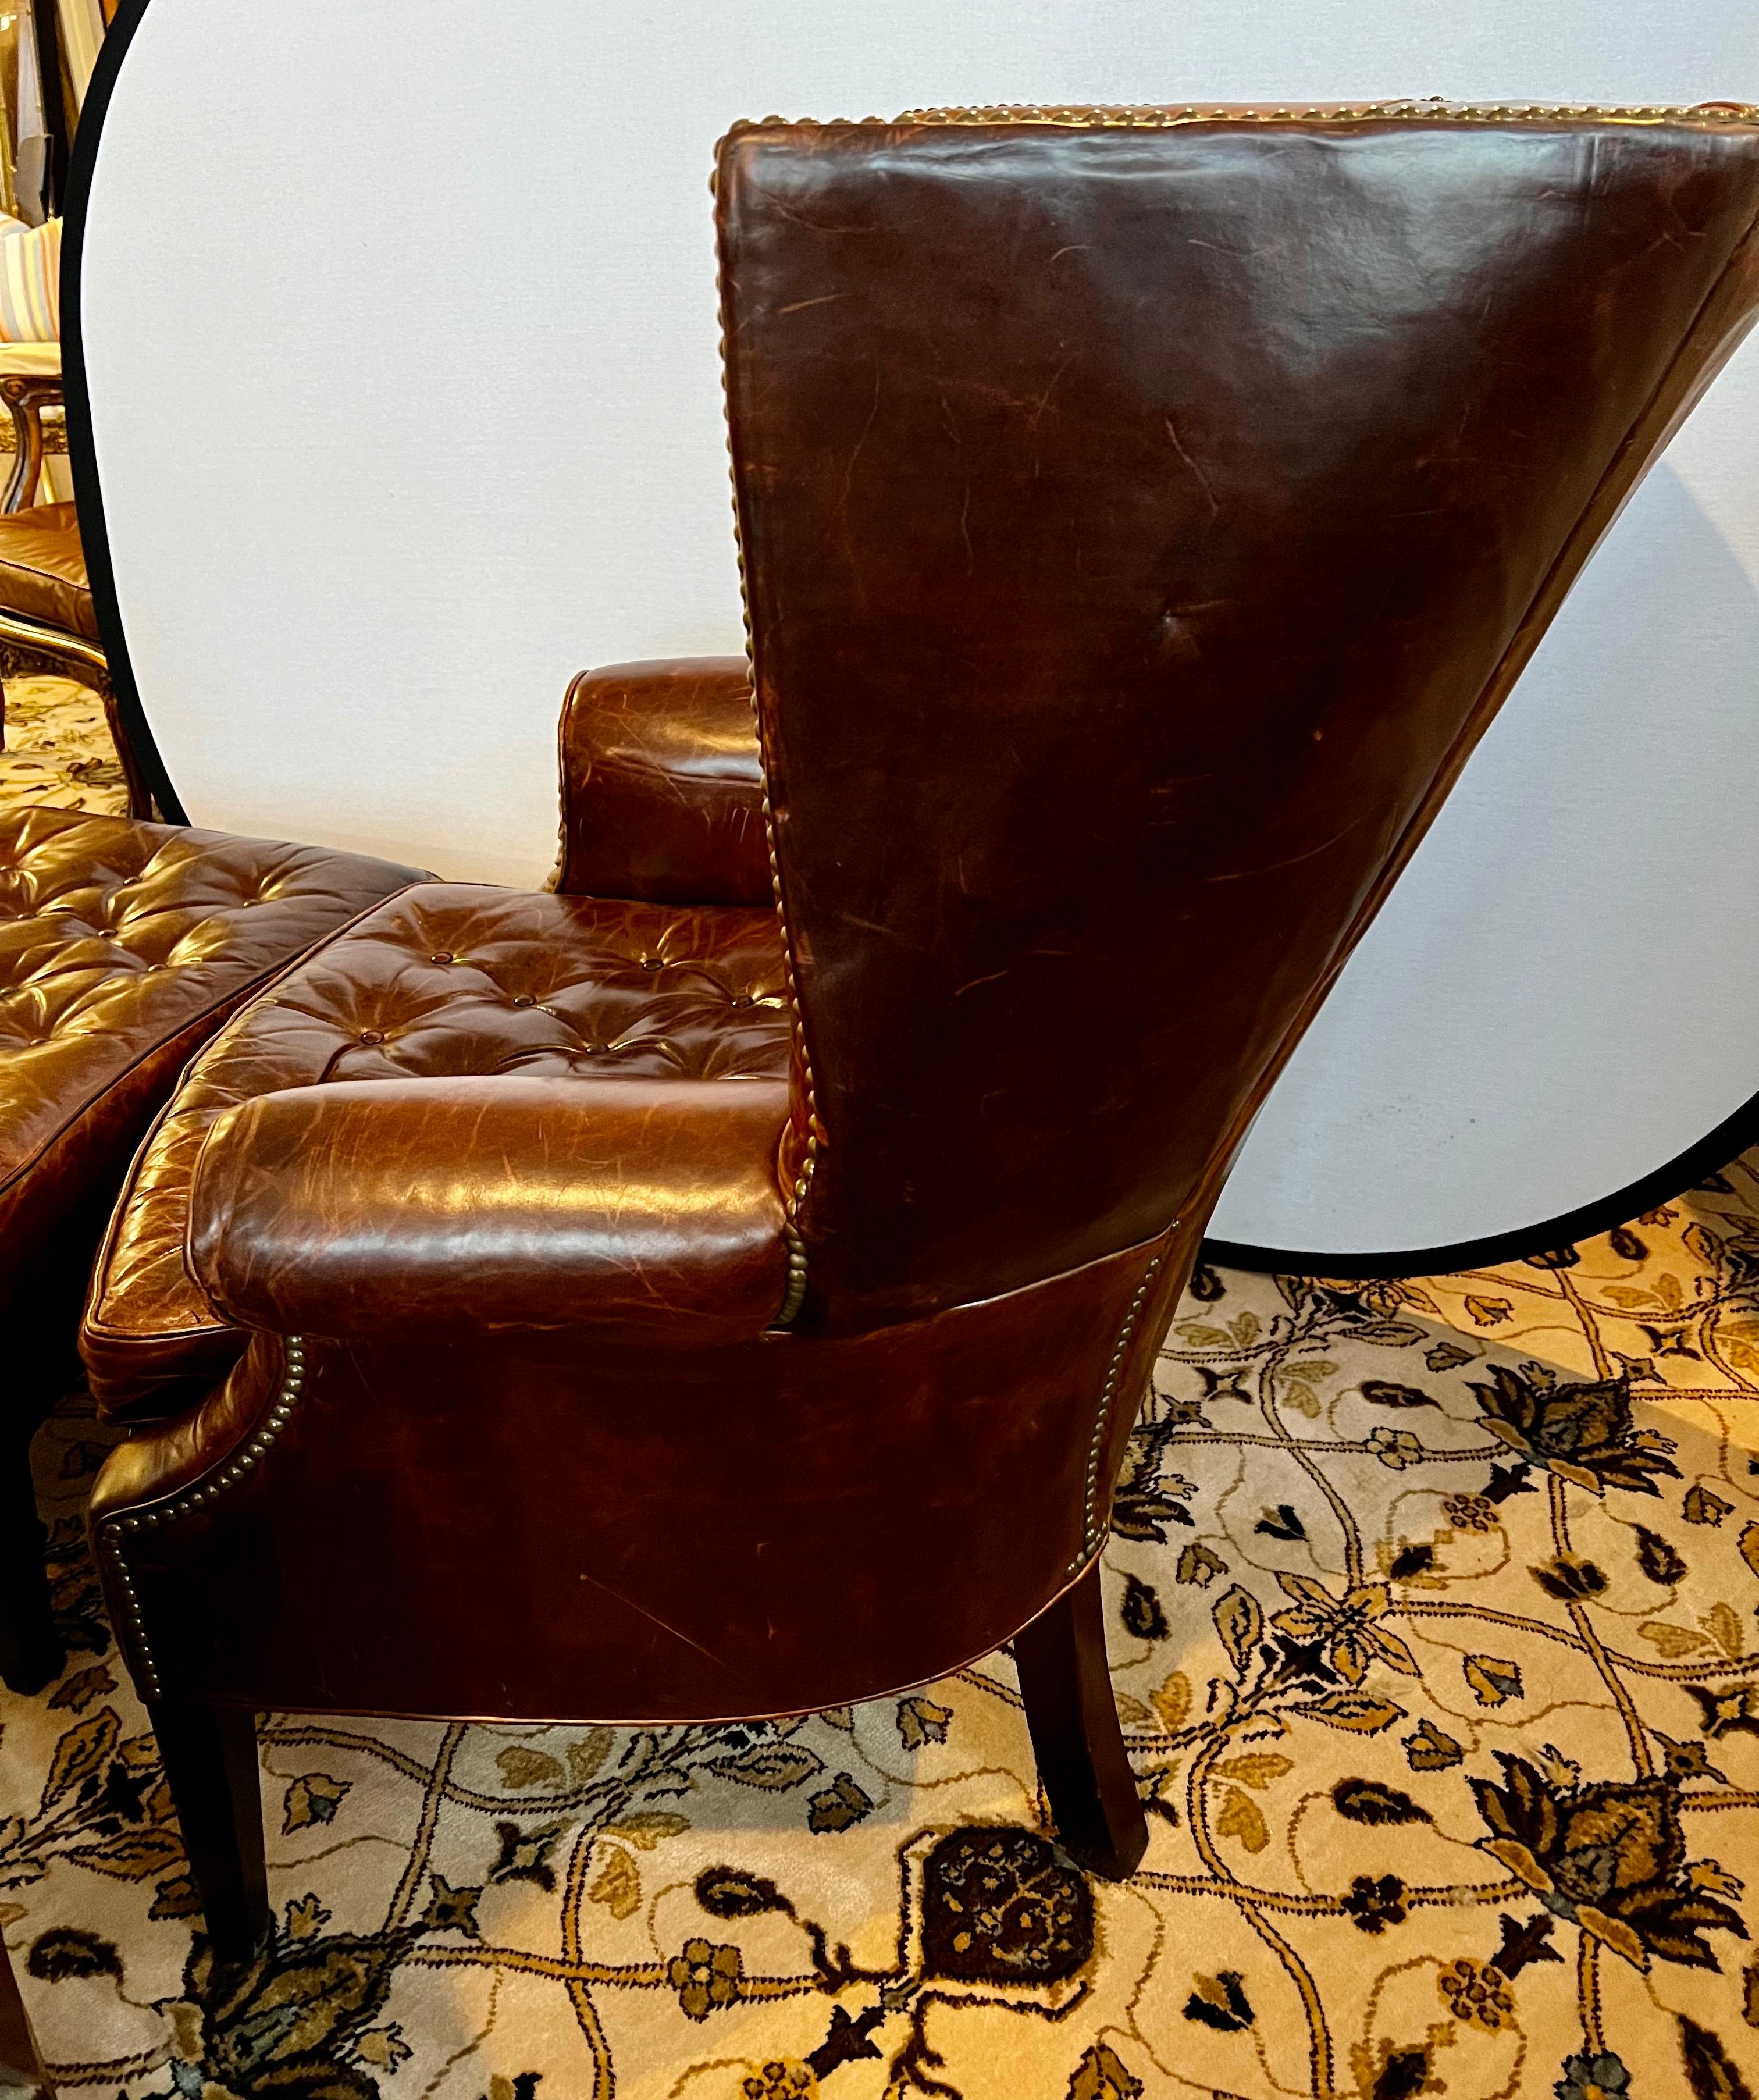 Elegant wingback dark brown leather wingback chair and ottoman combo with distressed leather patina that really adds to the appeal.  See all pics.